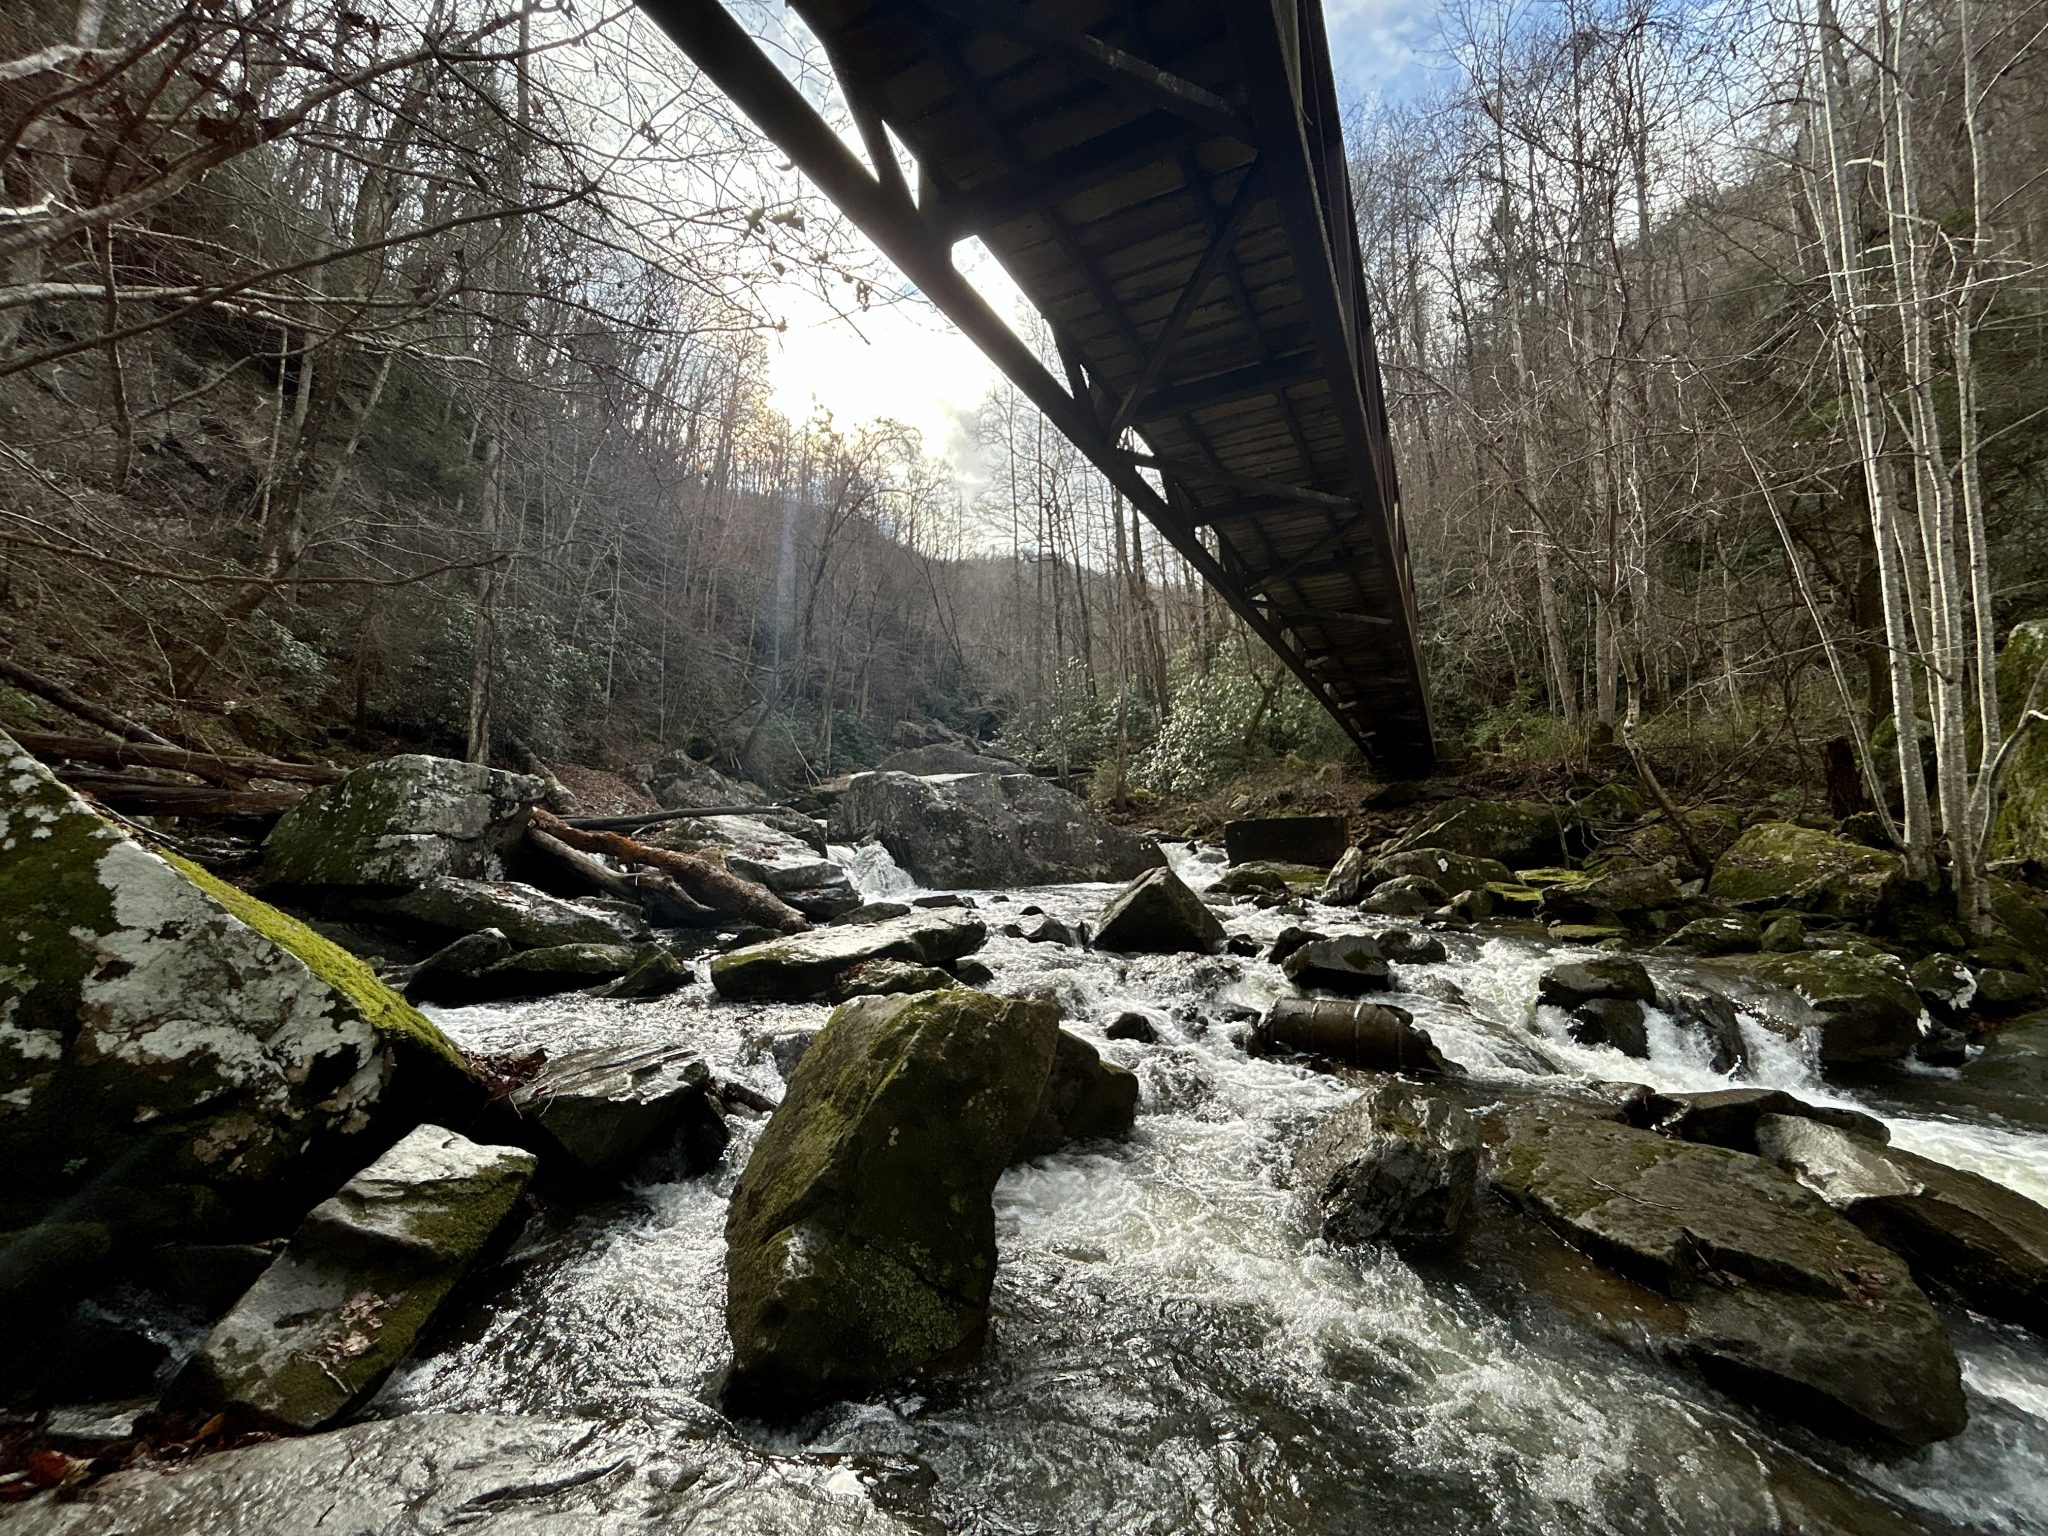 Kaymoor Trail, New River Gorge National Park, Fayette County, West Virginia